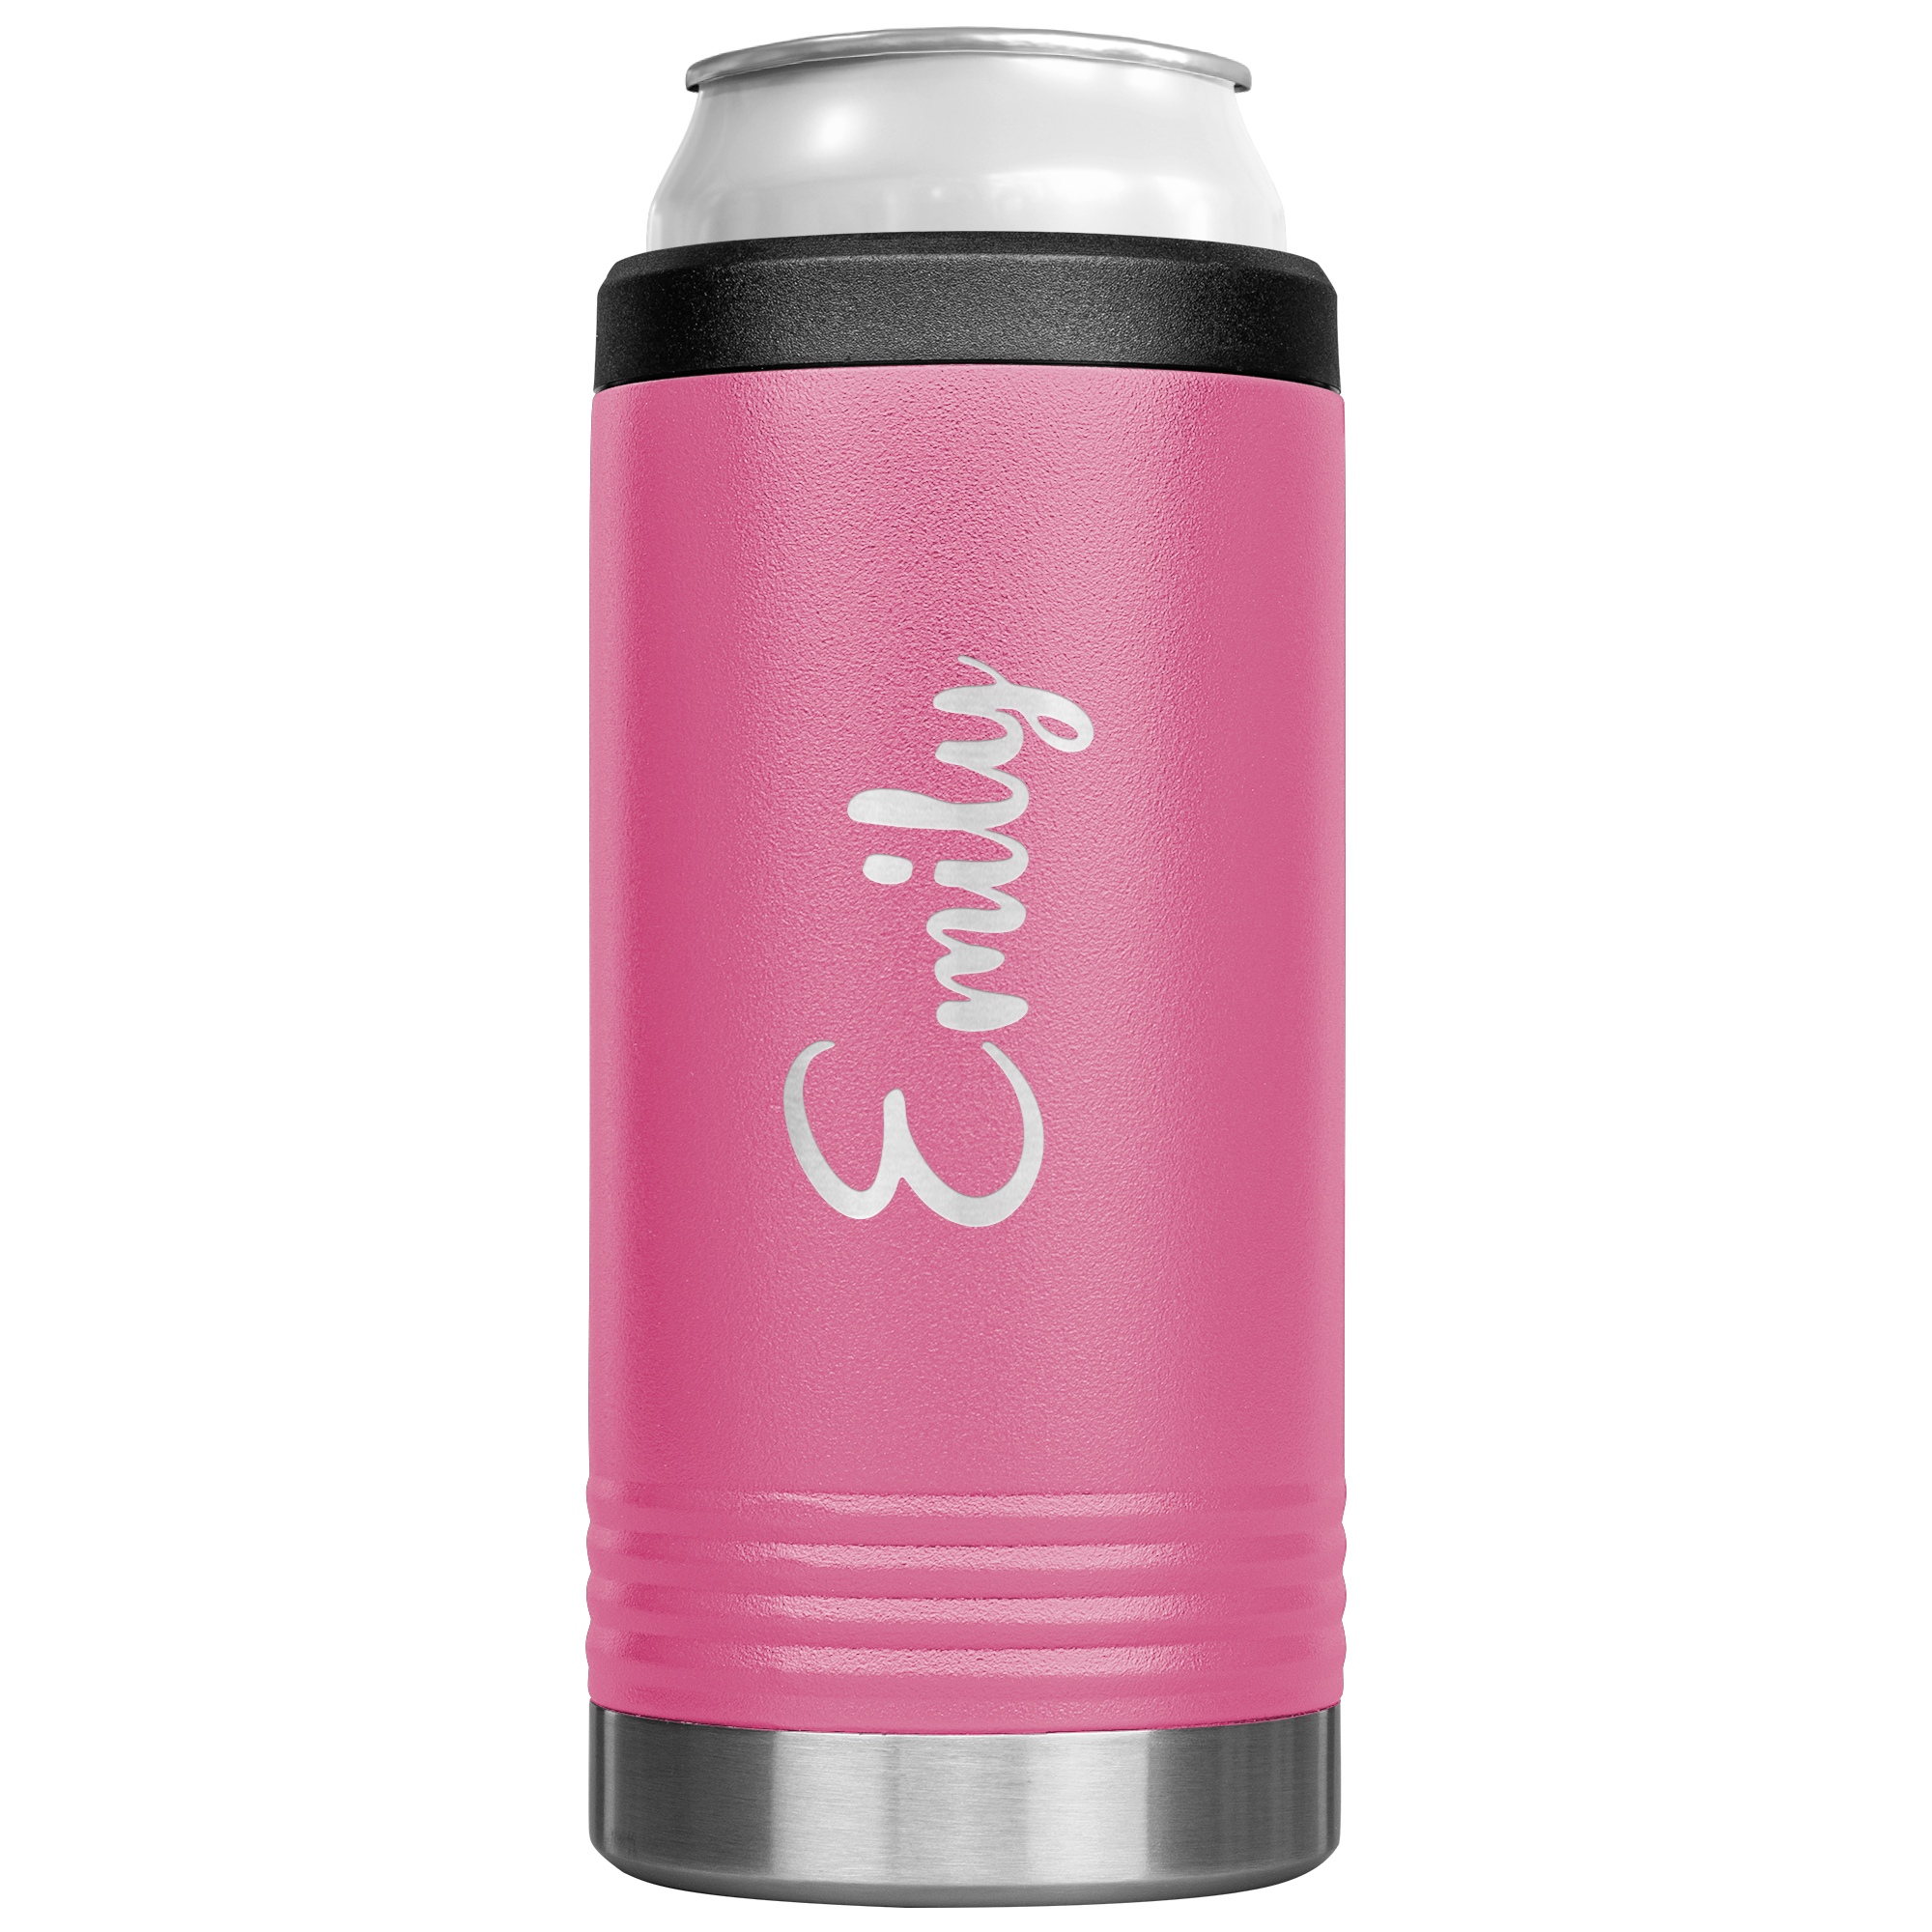 https://lantsagifts.com/wp-content/uploads/2022/10/Made-To-Teach-Personalized-Koozie-Pink-1.png